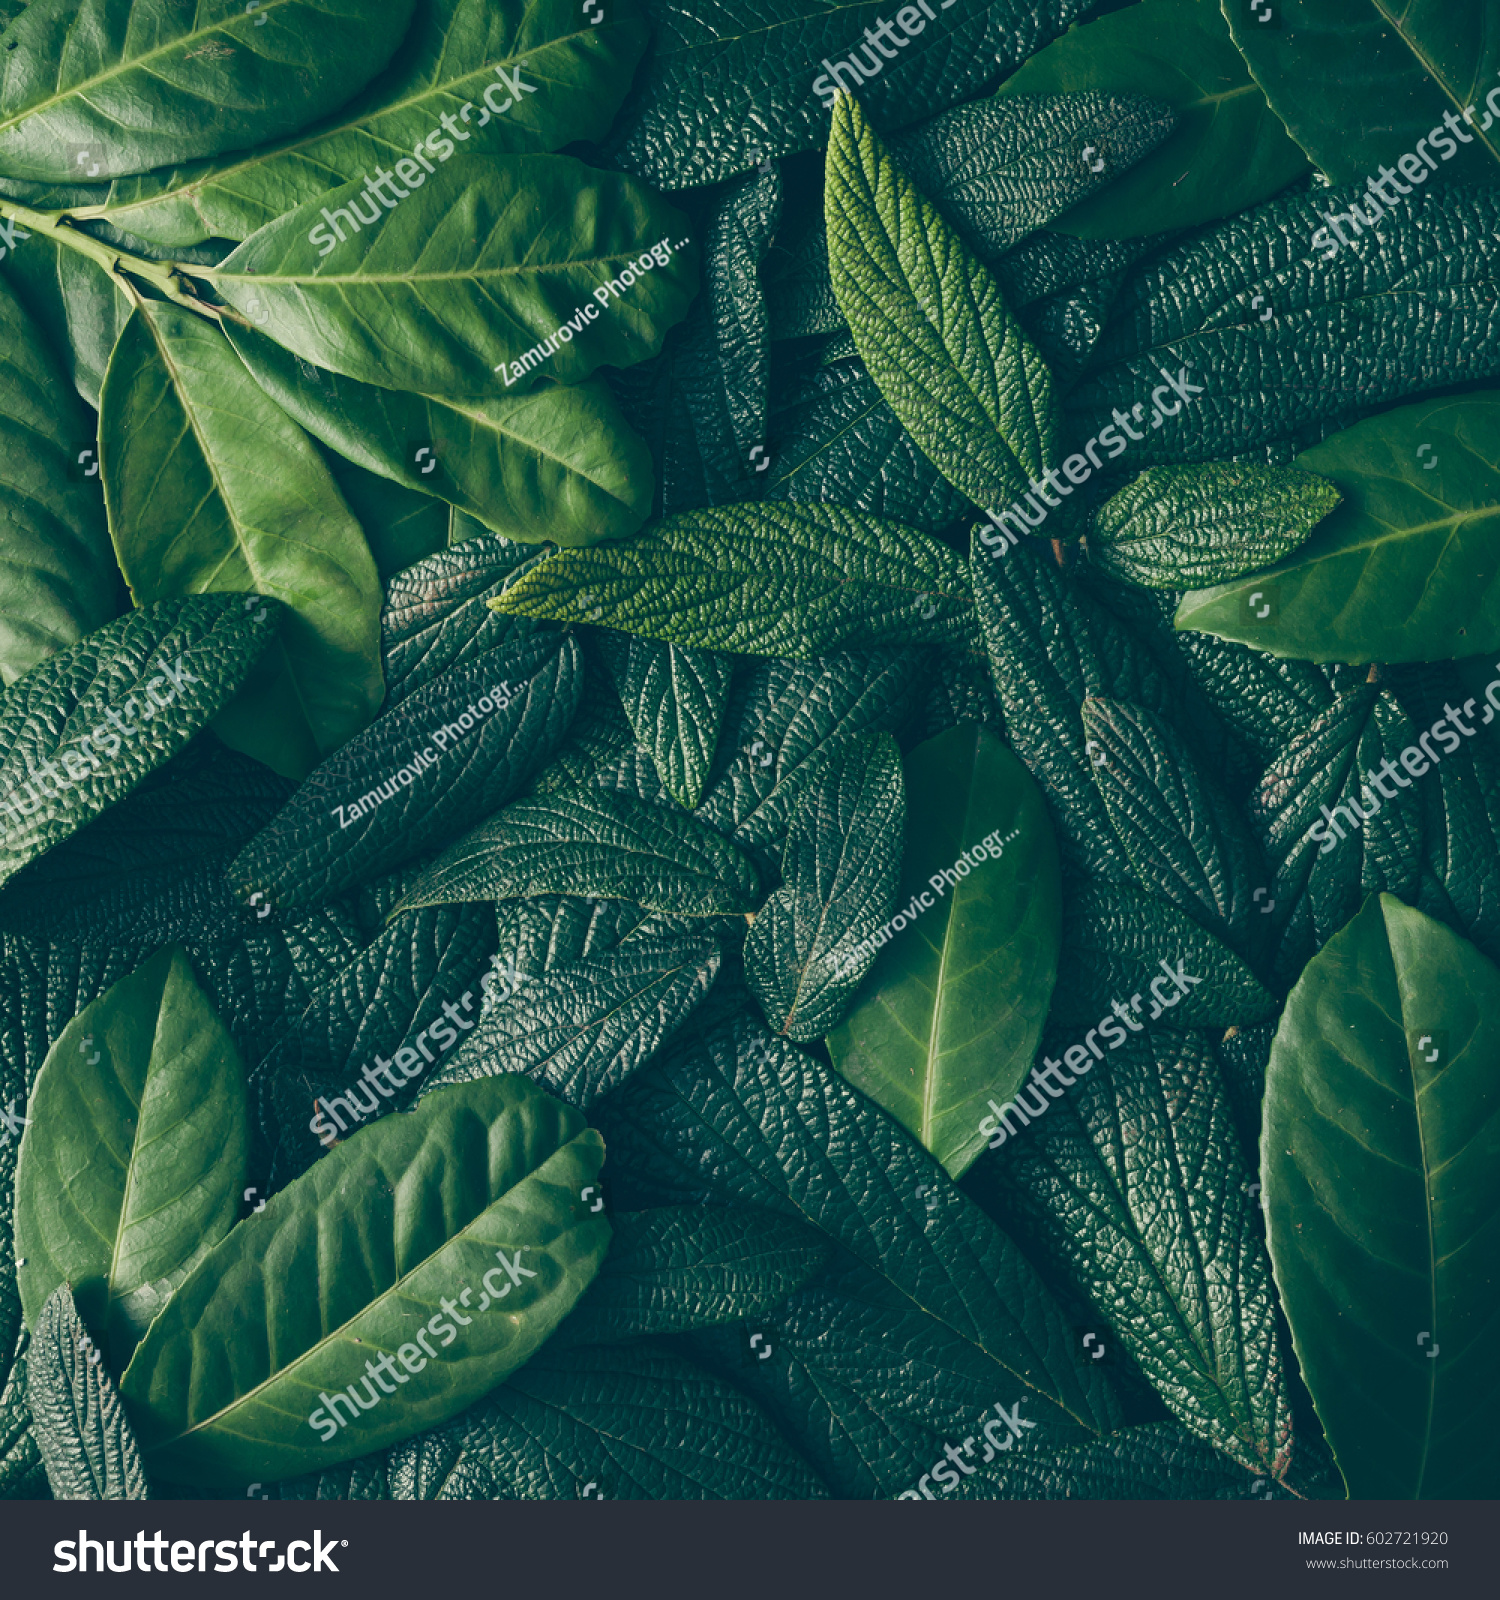 https://image.shutterstock.com/z/stock-photo-creative-layout-made-of-green-leaves-flat-lay-nature-concept-602721920.jpg